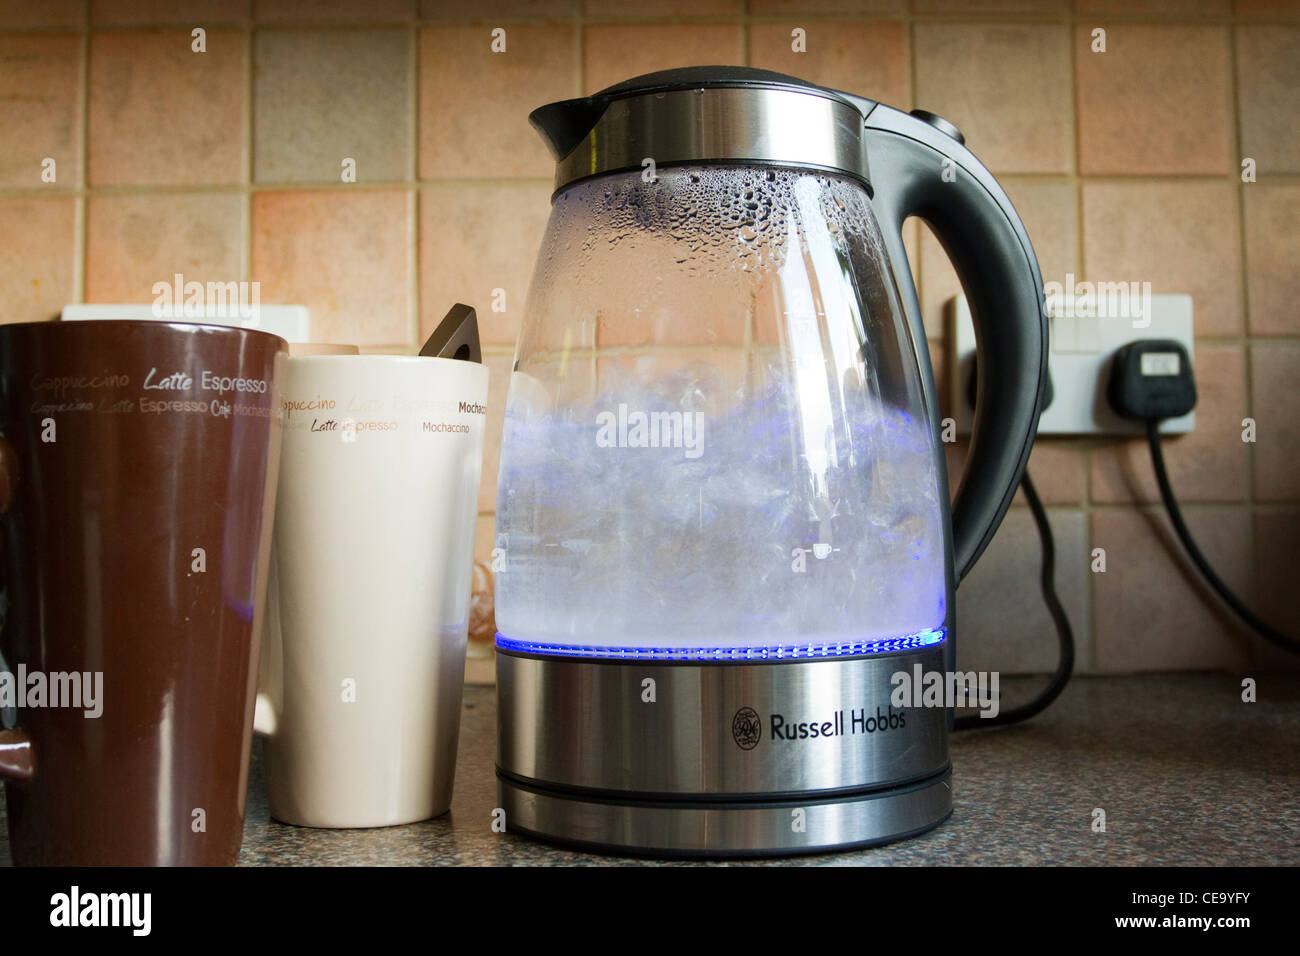 https://c8.alamy.com/comp/CE9YFY/kitchen-with-coffee-mugs-and-boiling-electric-glass-kettle-berkshire-CE9YFY.jpg